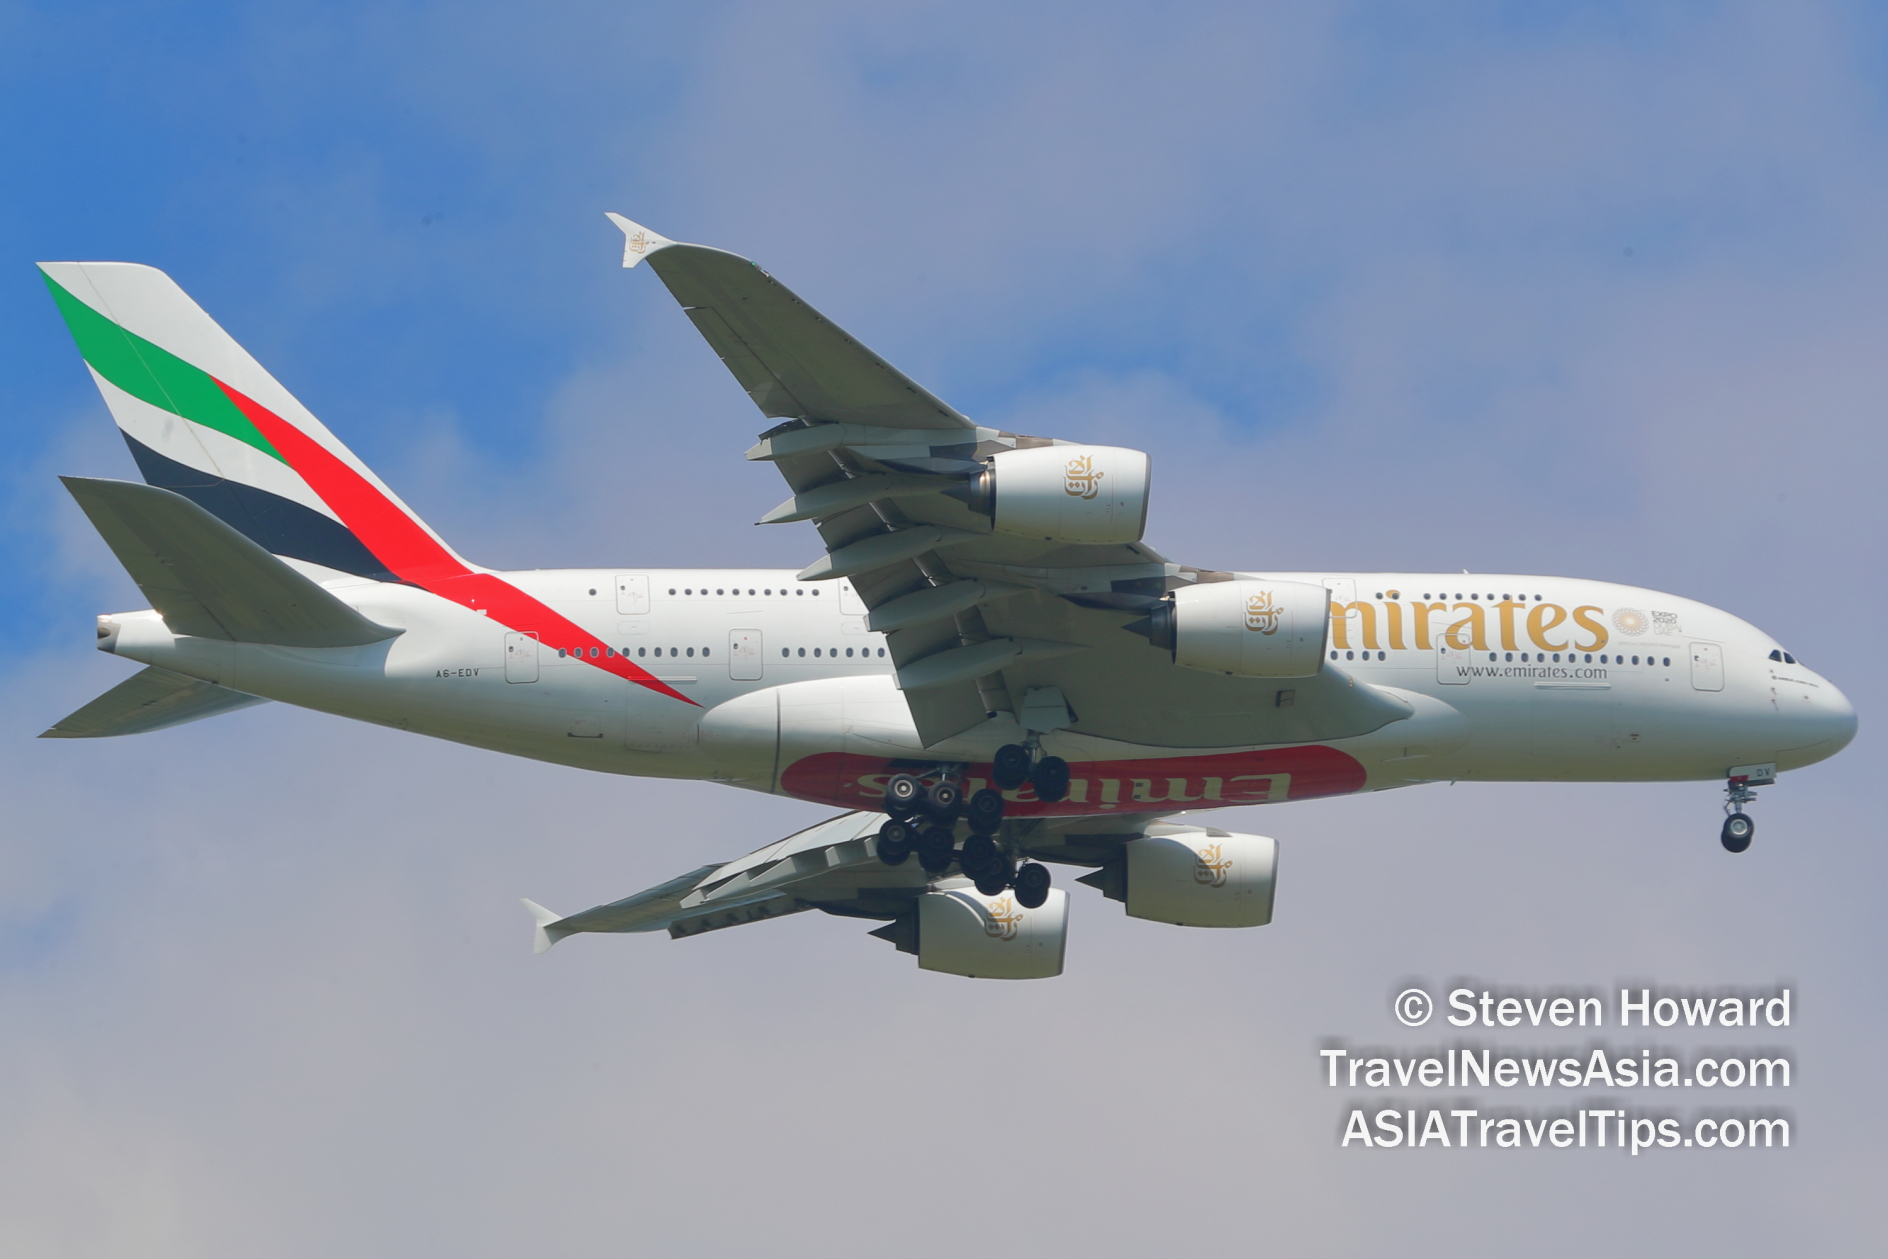 Emirates A380 reg: A6-EDV. Picture by Steven Howard of TravelNewsAsia.com Click to enlarge.